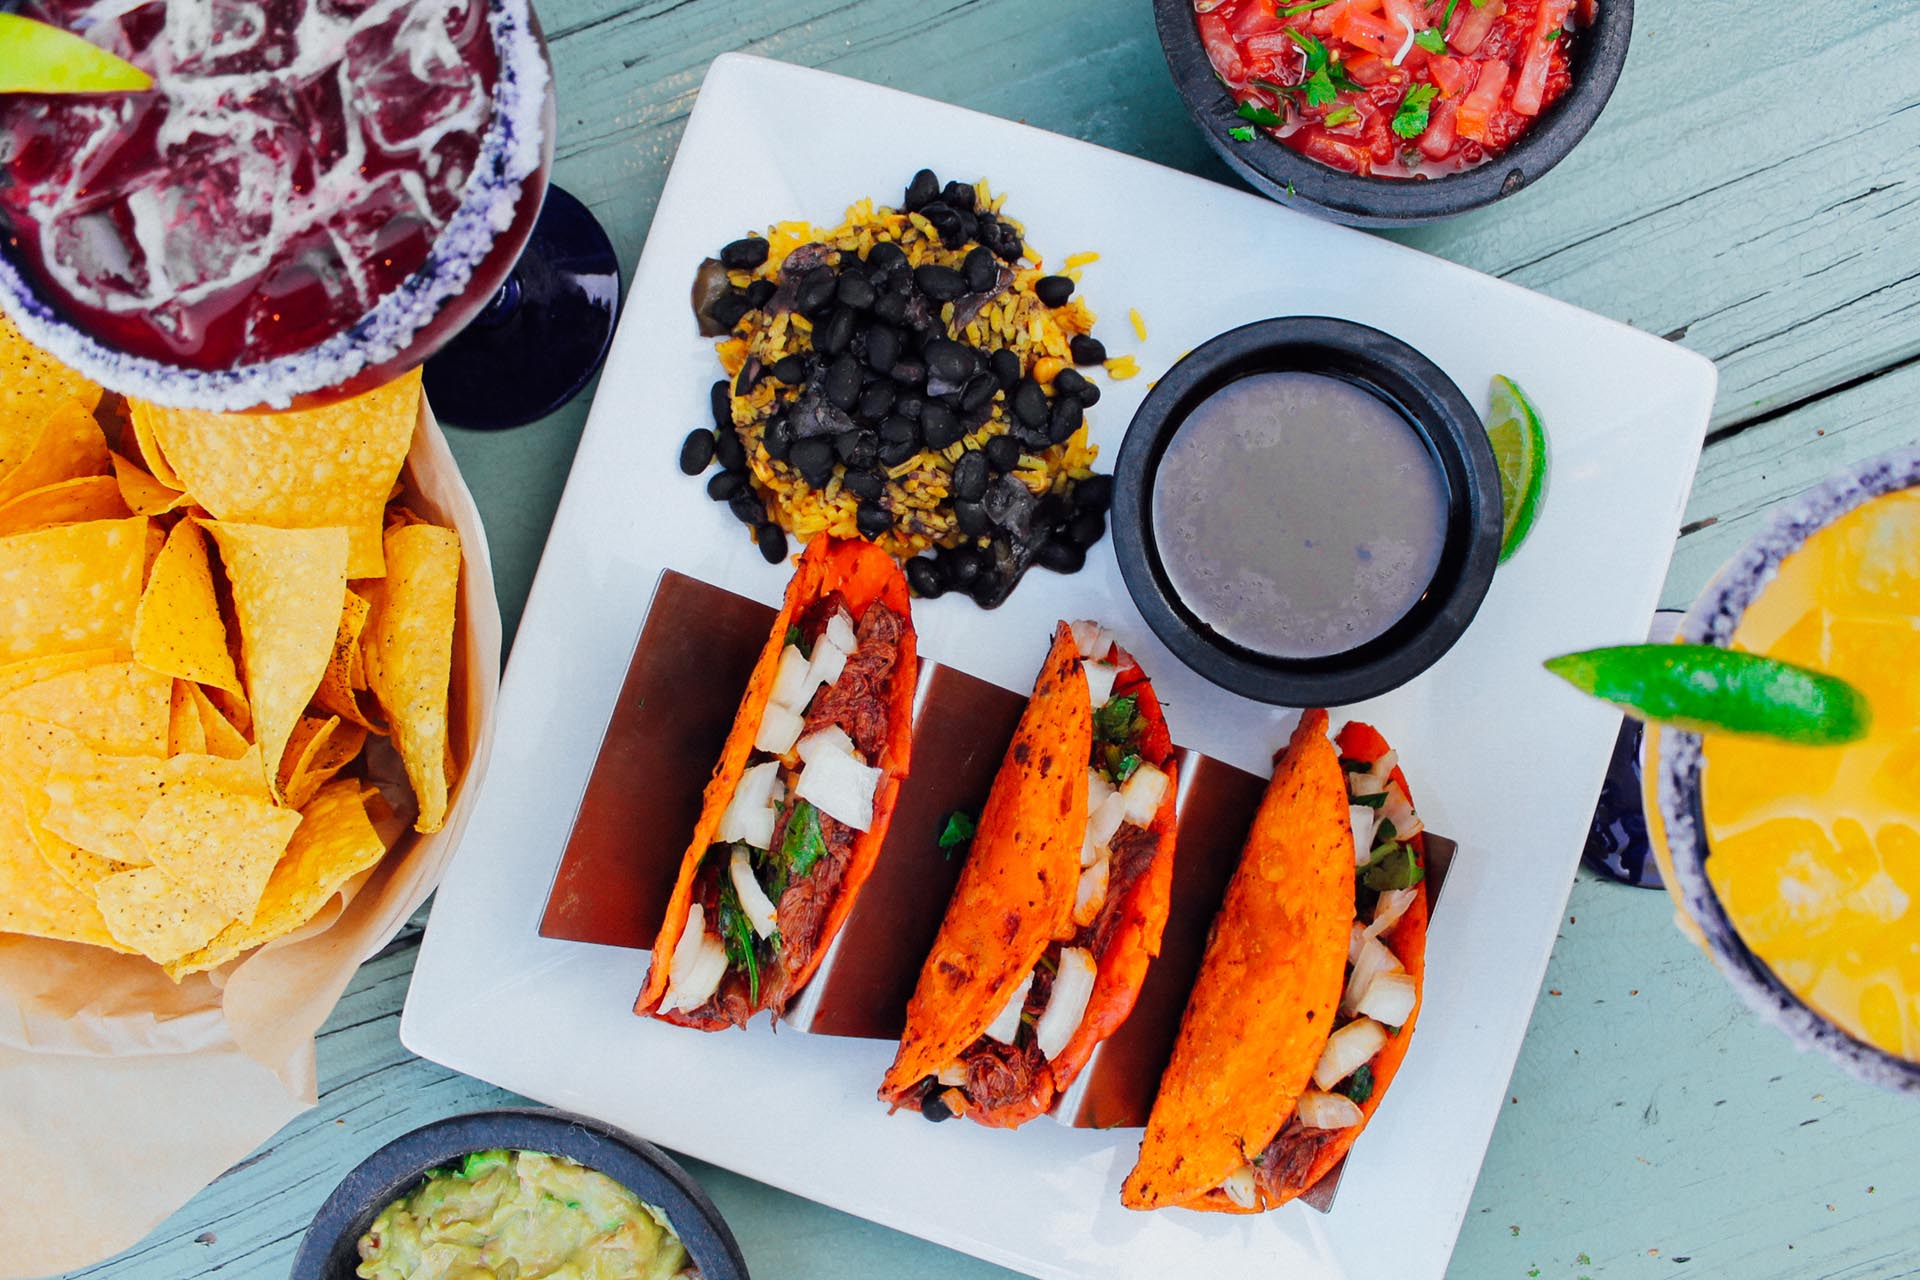 Are tacos the new burgers? A slew of new taco-centric places in Tampa Bay make the case